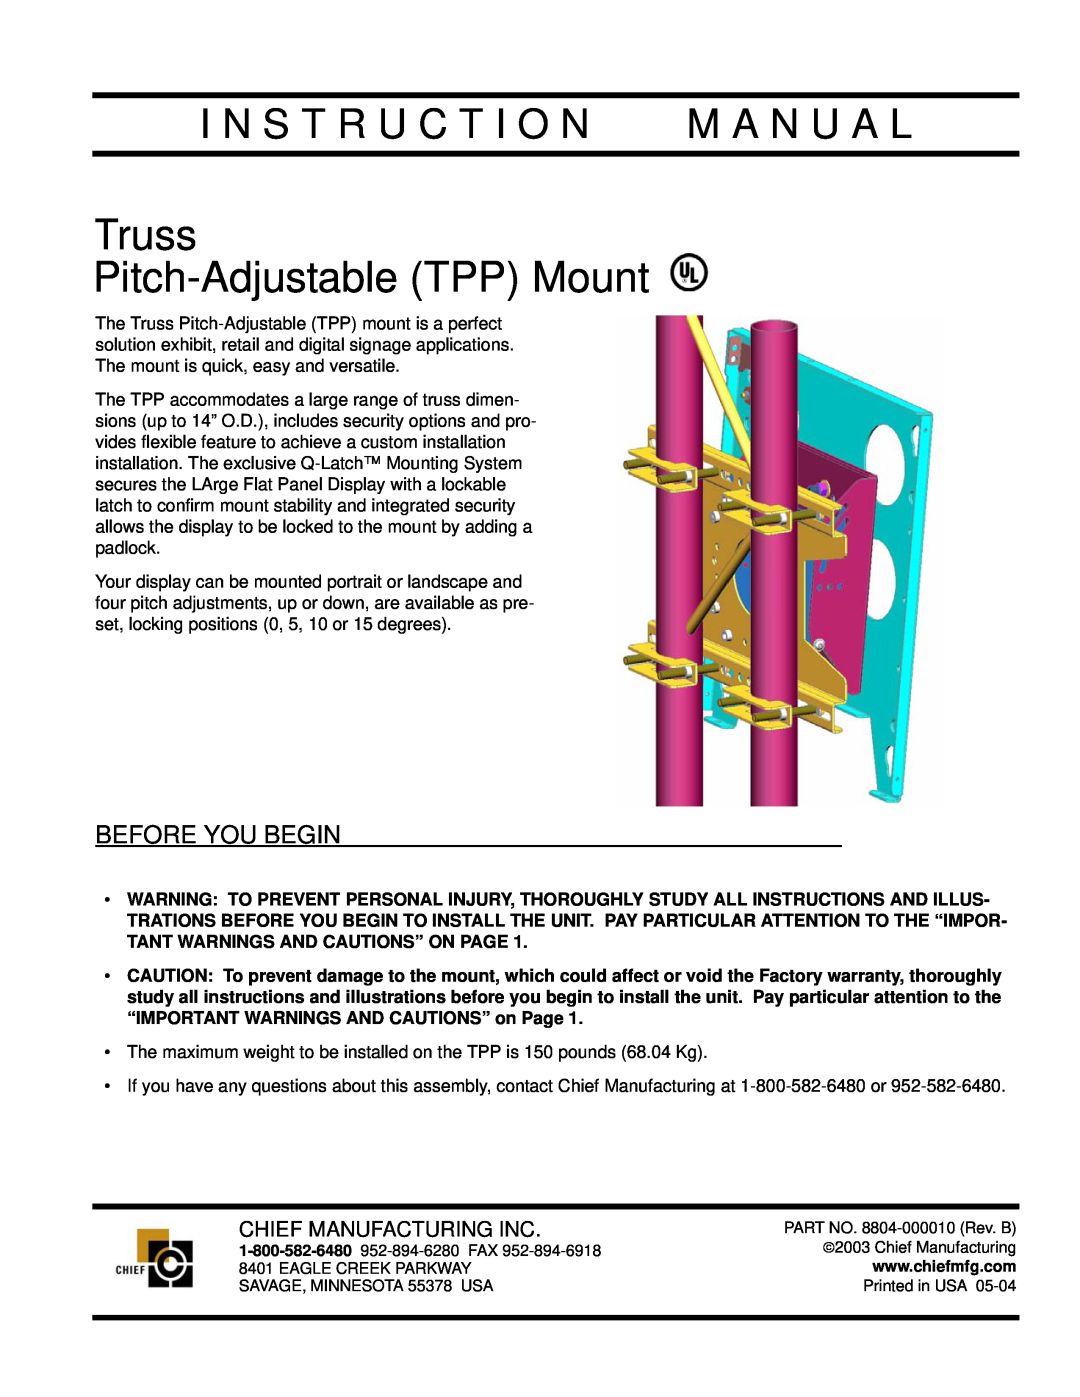 Chief Manufacturing instruction manual Before You Begin, Chief Manufacturing Inc, Truss Pitch-AdjustableTPP Mount 